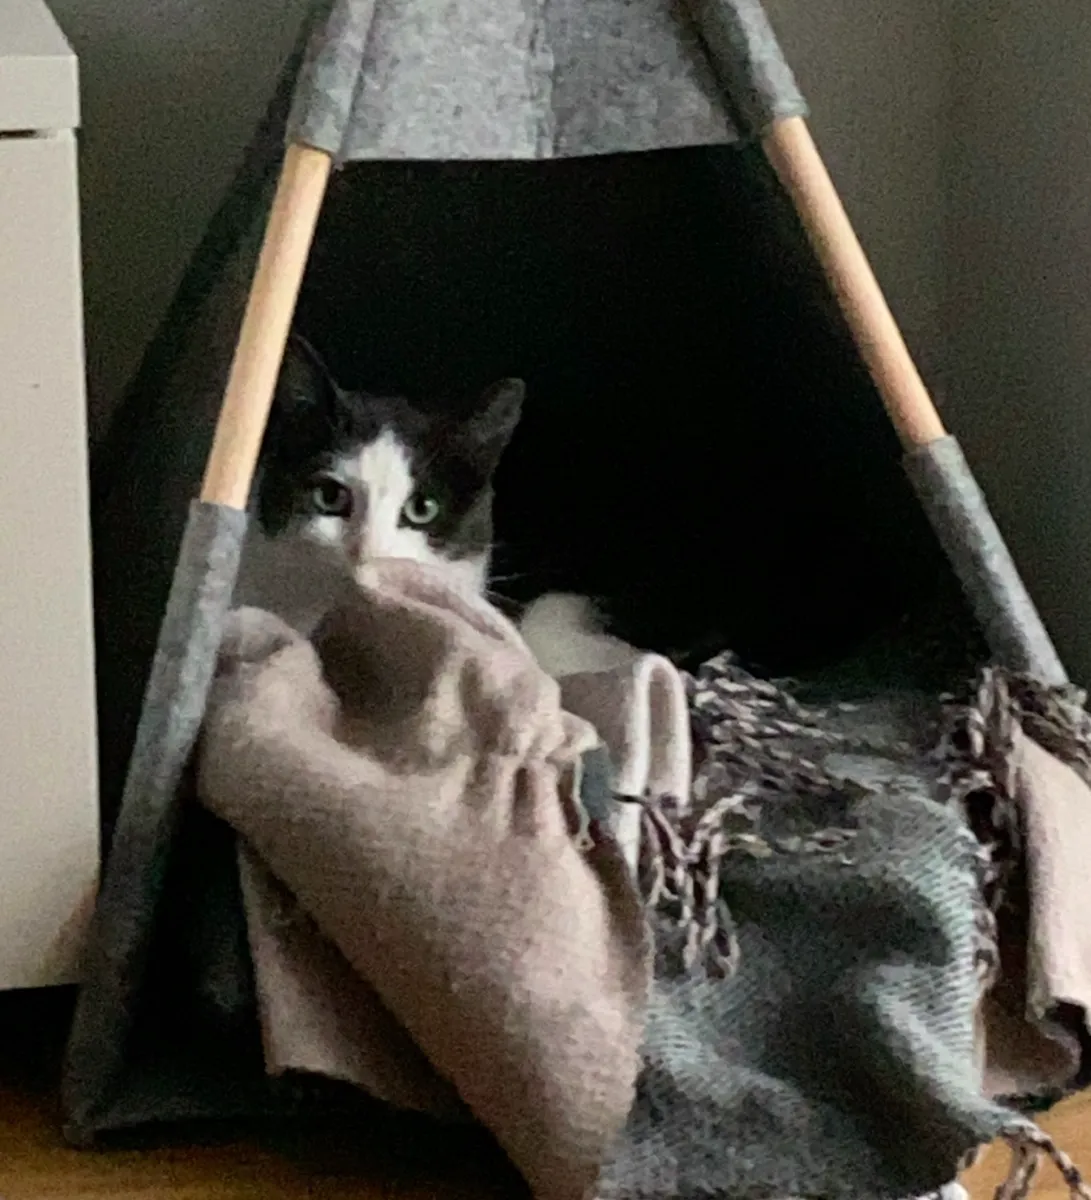 Leo hiding in his little tipi in the living room